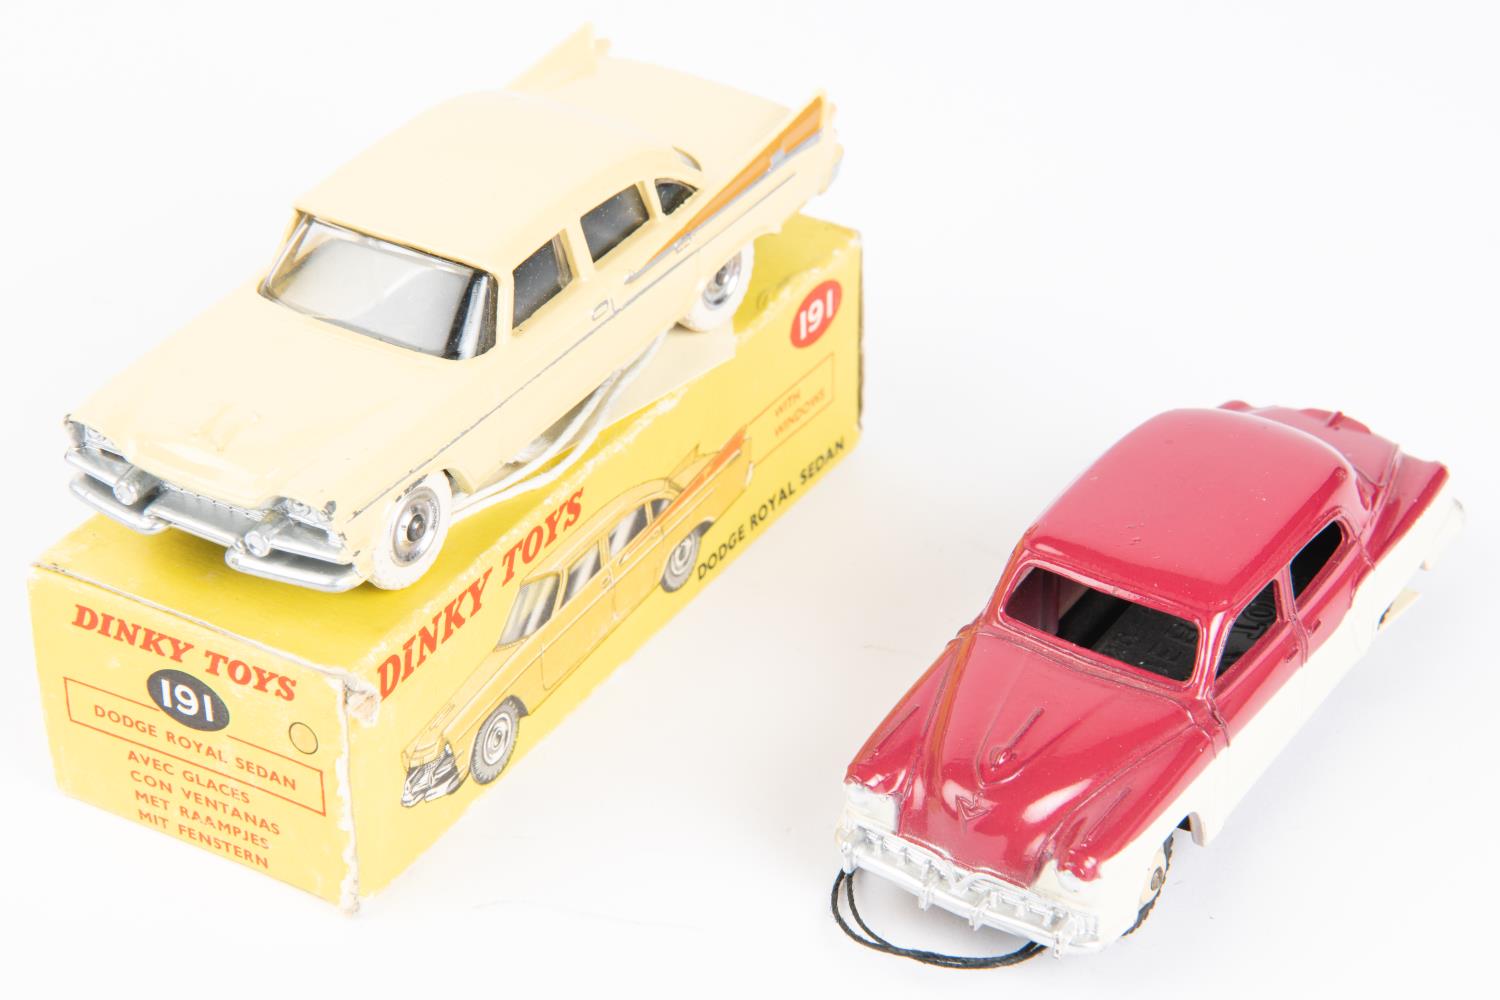 2 Dinky Toys American Cars. Dodge Royal Sedan (191). Example in cream with light brown flash, plated